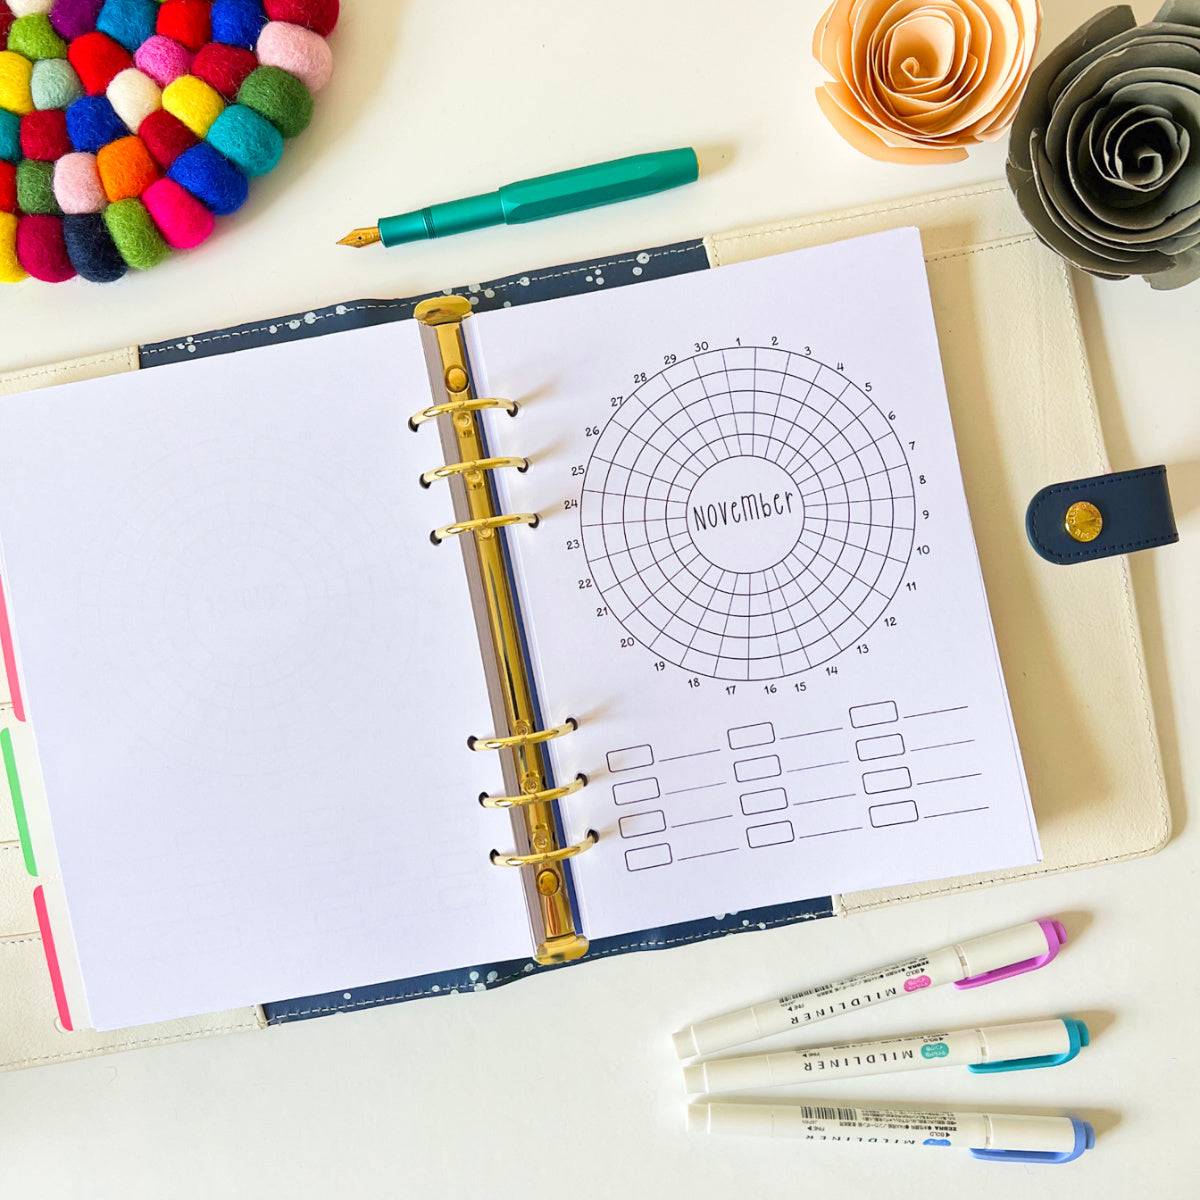 An open Monthly Habit Tracker lies on a table, displaying a circular calendar for November with blanks for weekly entries. Surrounding the tracker, designed for goal setting, are colorful markers, a multicolored wool pom-pom coaster, a green pen, and decorative items resembling flowers.